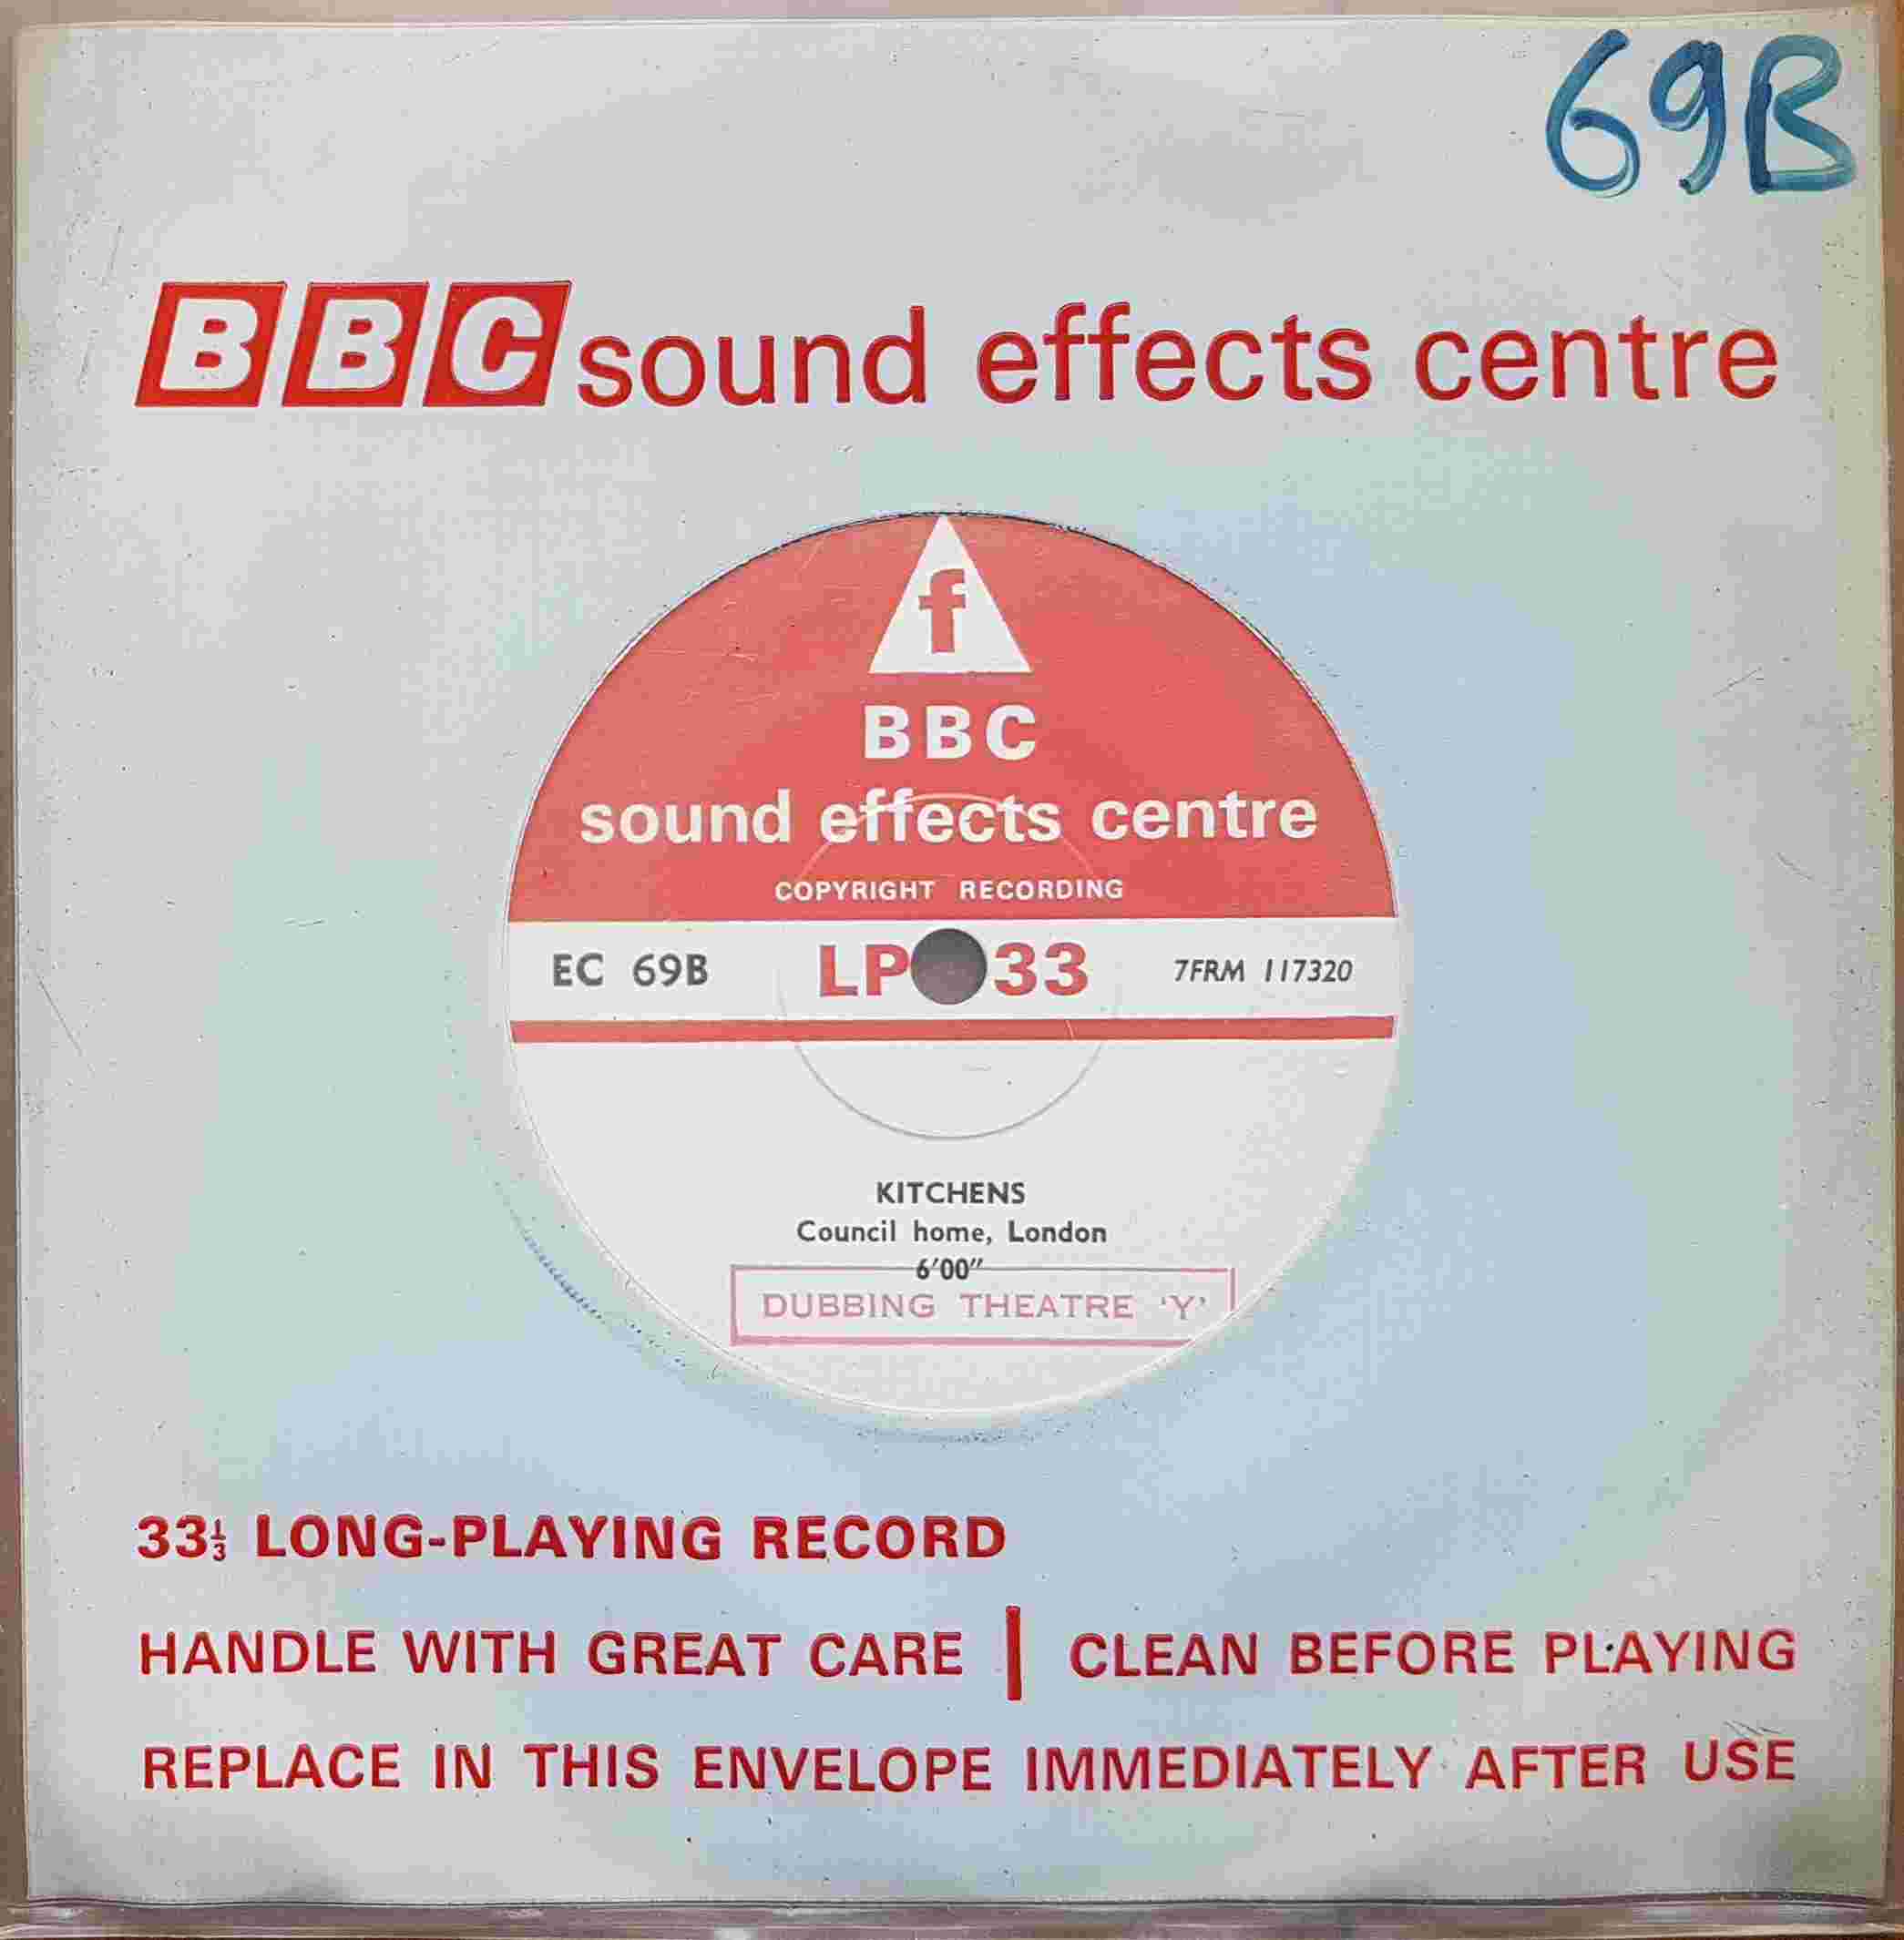 Picture of EC 69B Kitchens by artist Not registered from the BBC singles - Records and Tapes library